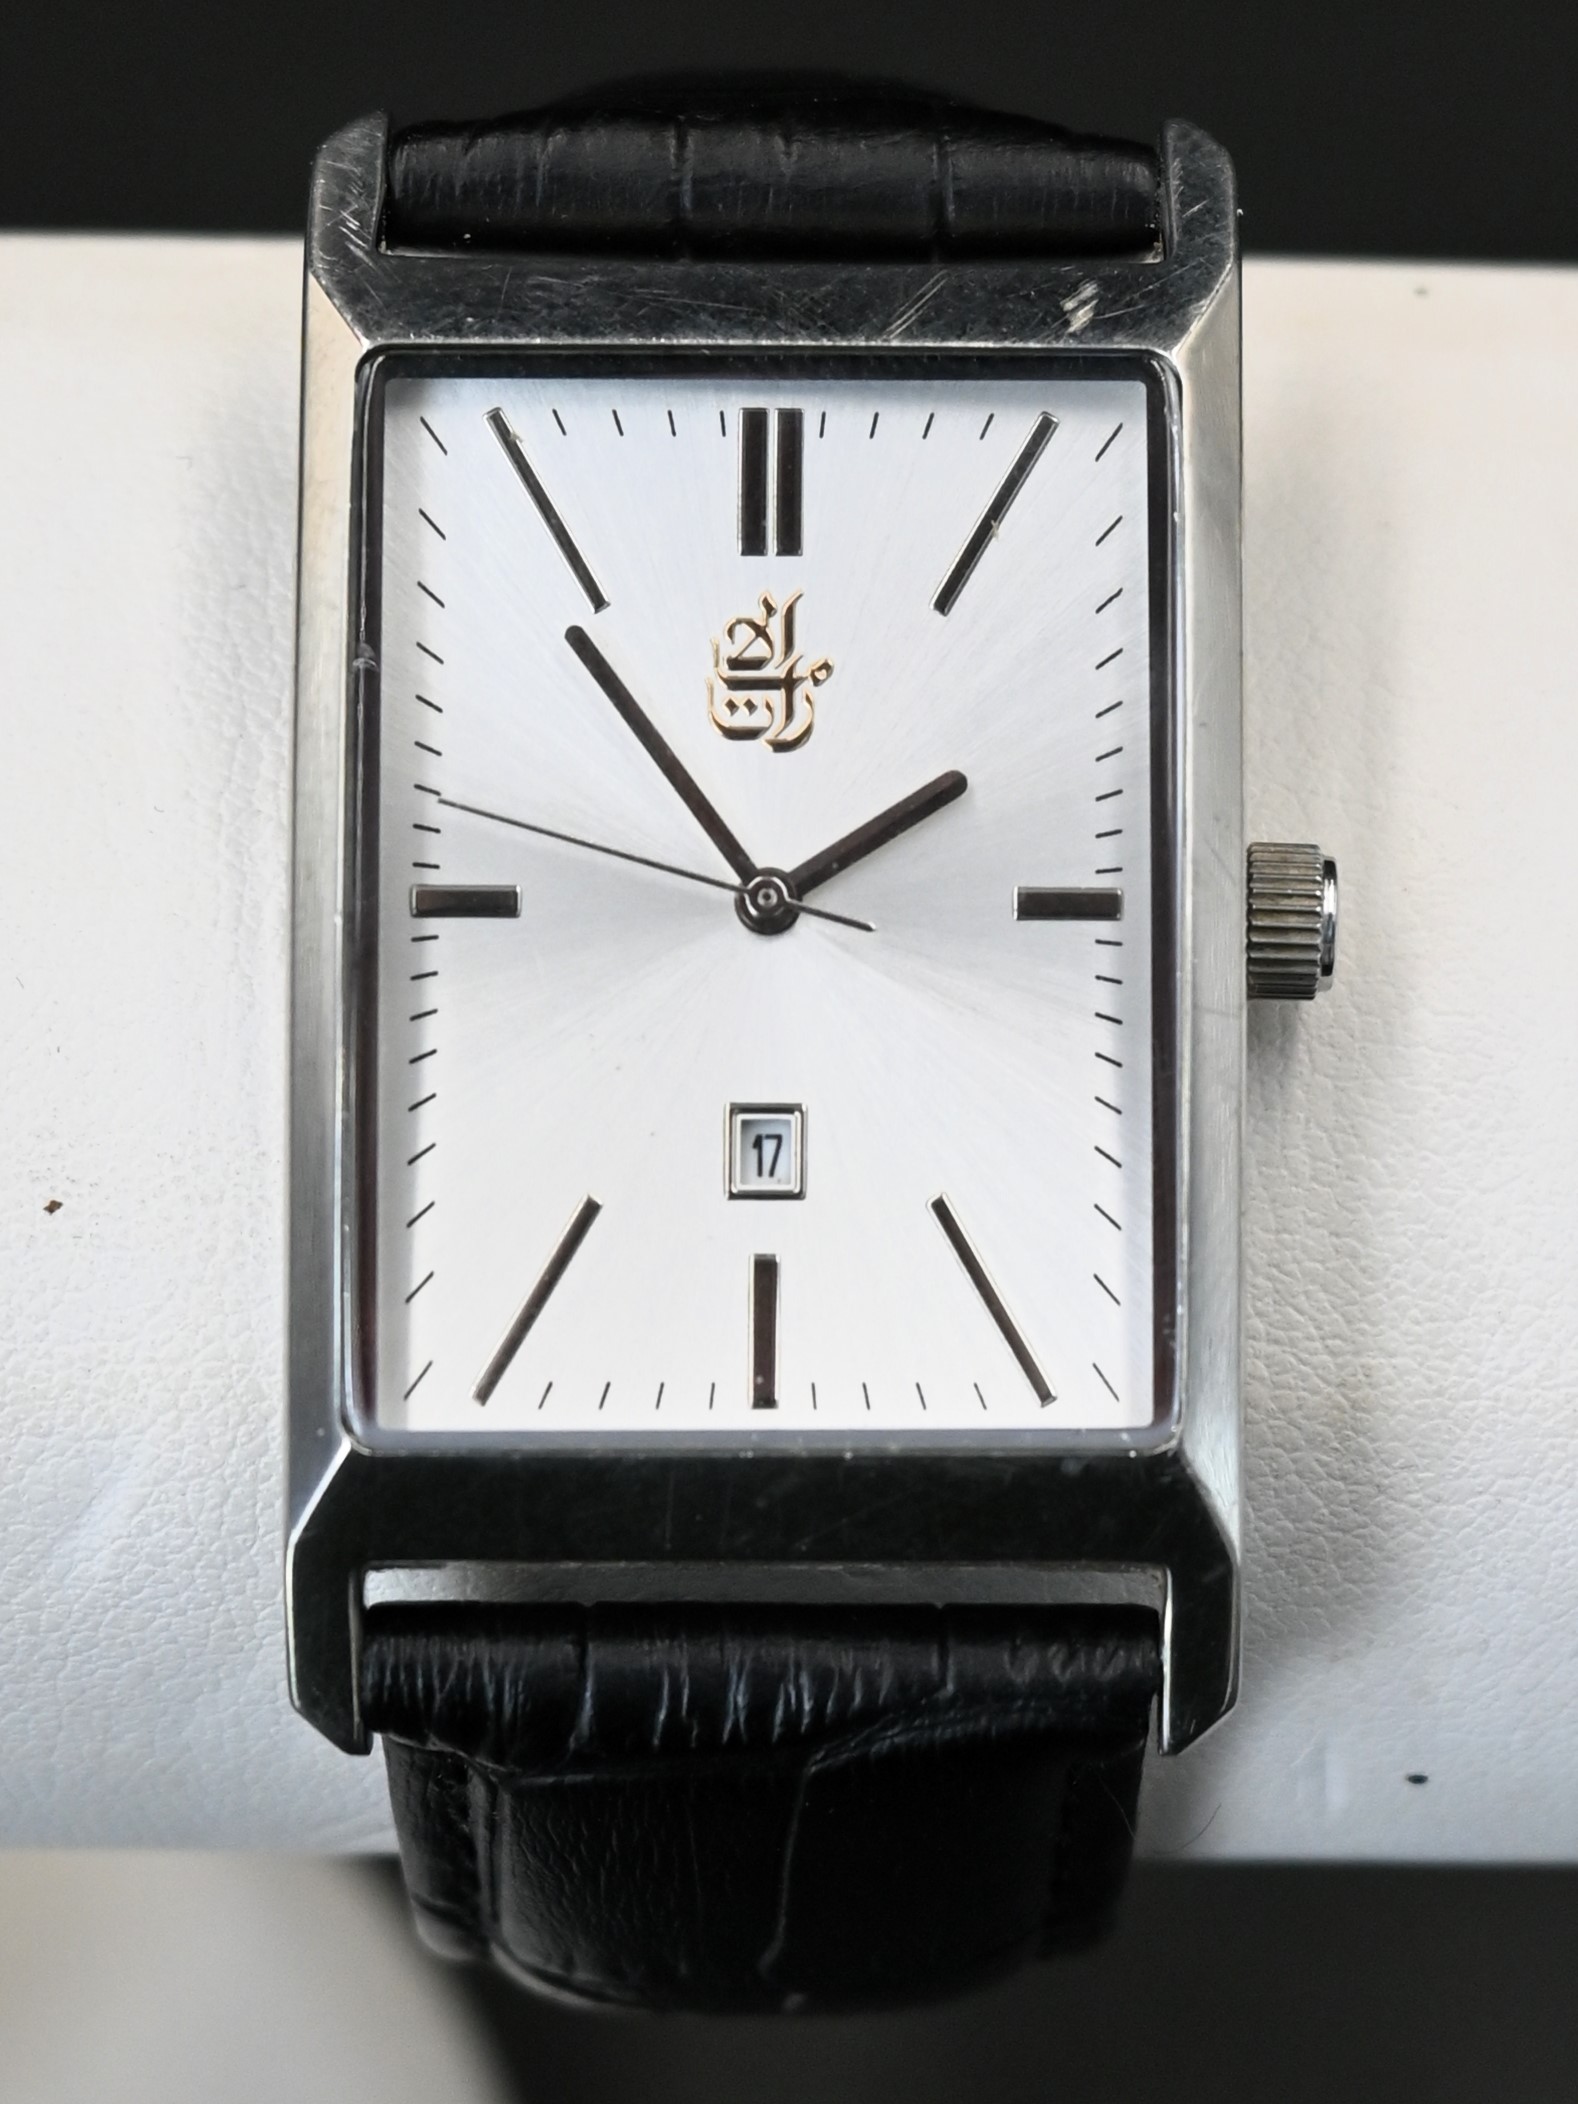 Emirates quartz wristwatch with the Emirate insignia with a silvered face and baton markers date - Image 2 of 3